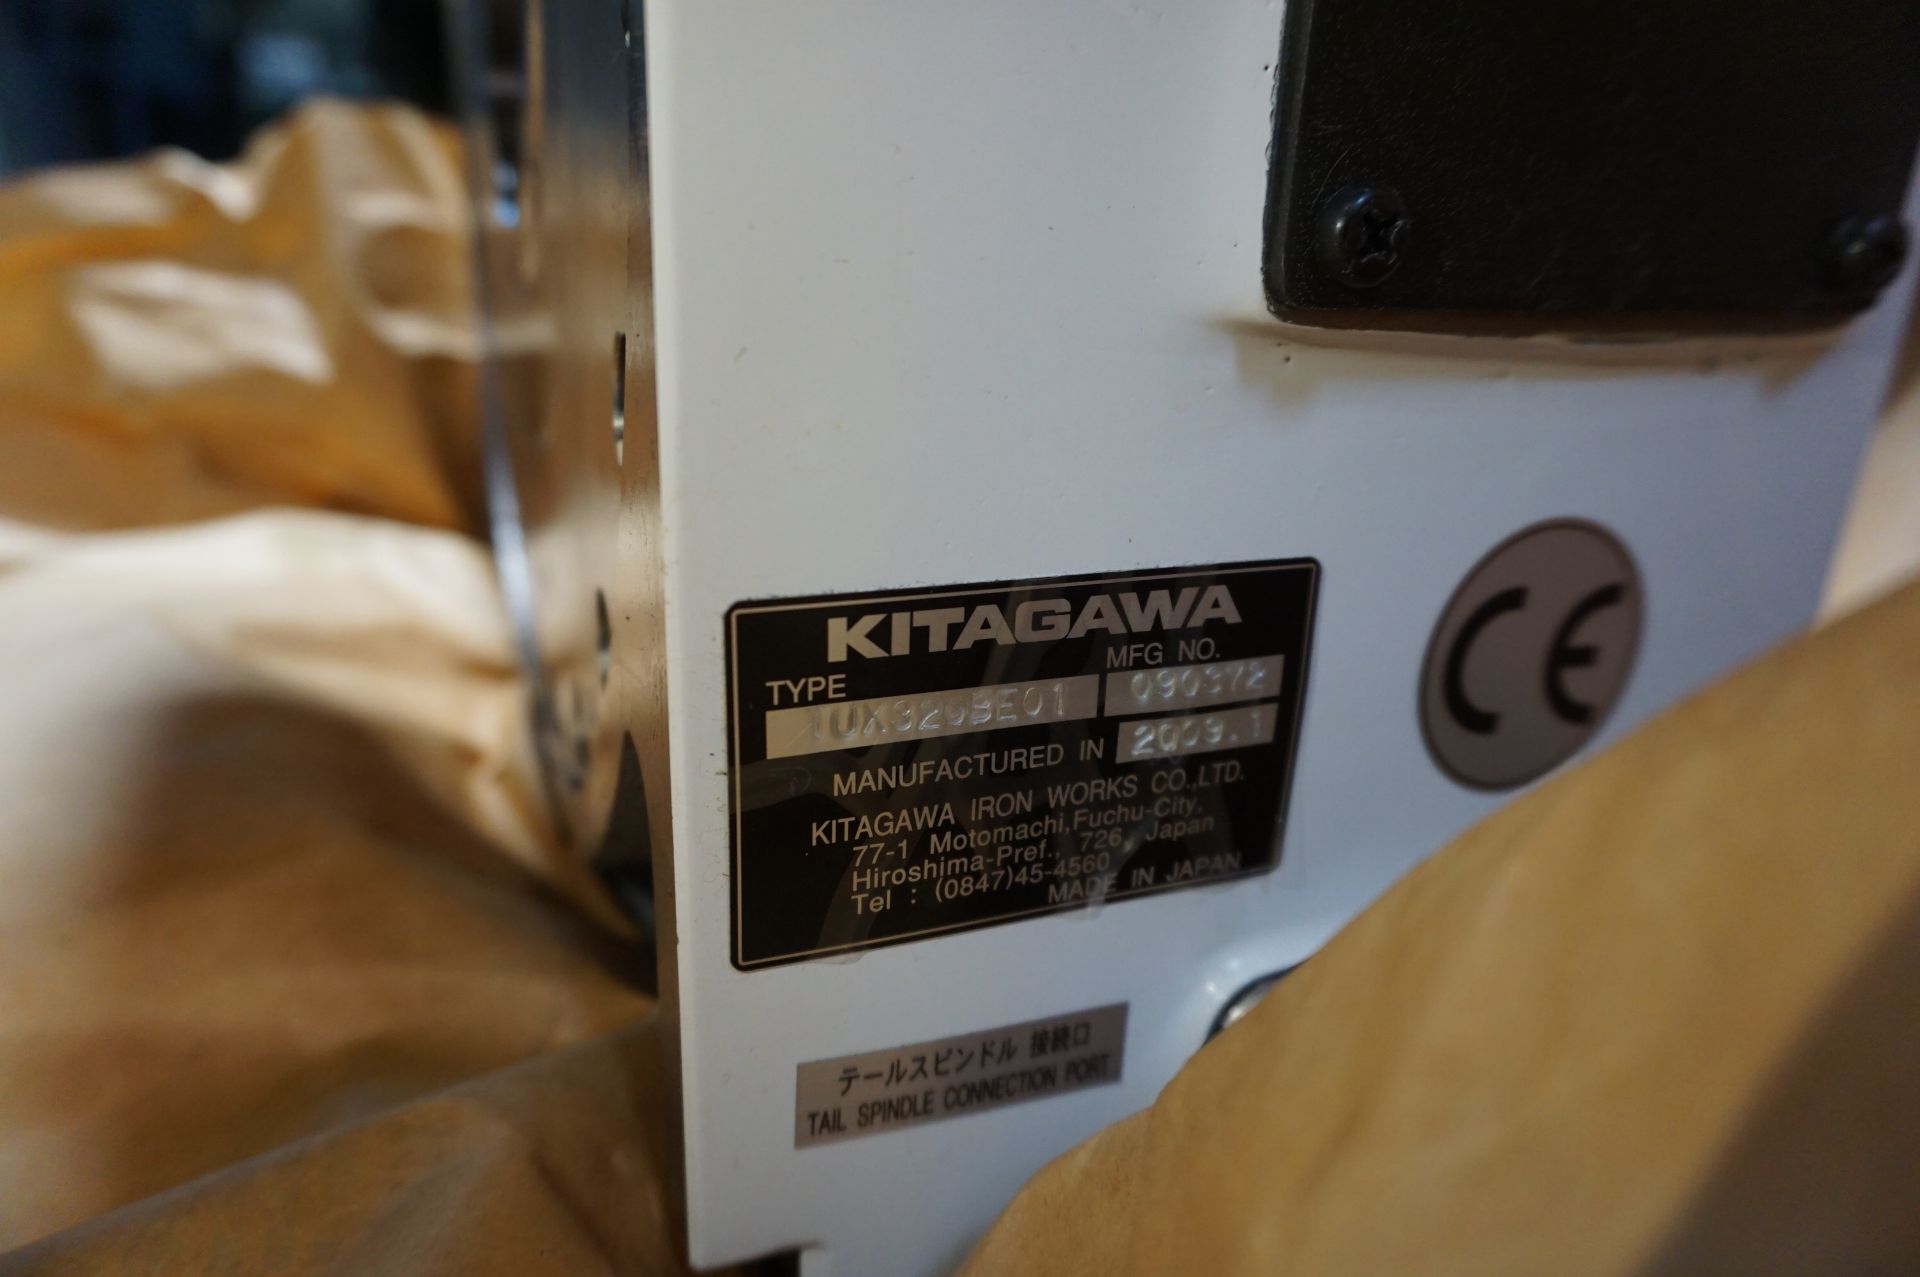 NEVER USED IN ORIGINAL BOX - 2009 KITIGAWA TUX320BE01 4TH AXIS ROTARY TABLE S/N 090372 - Image 5 of 8